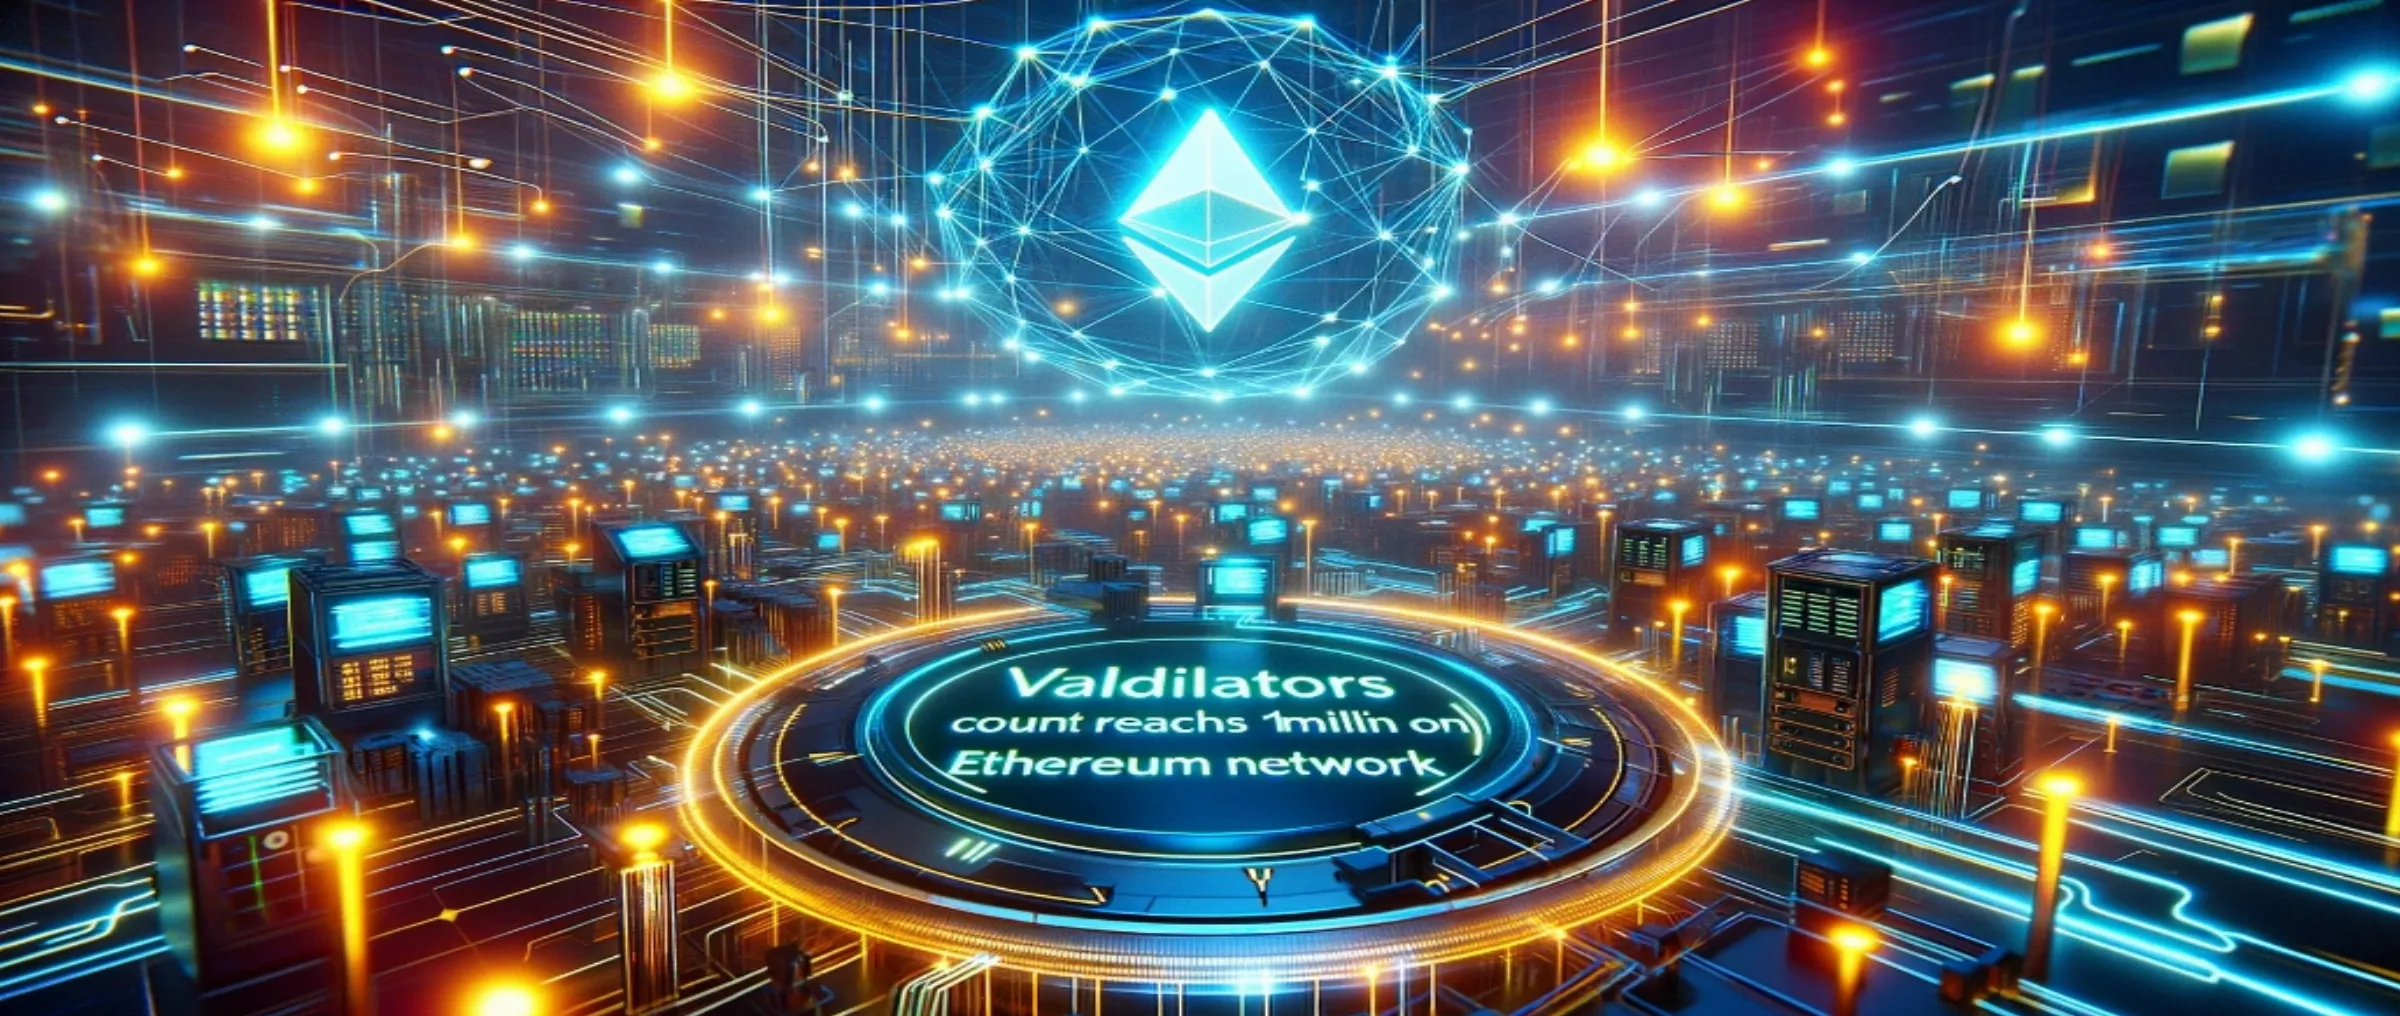 The number of validators has reached one million on the Ethereum network